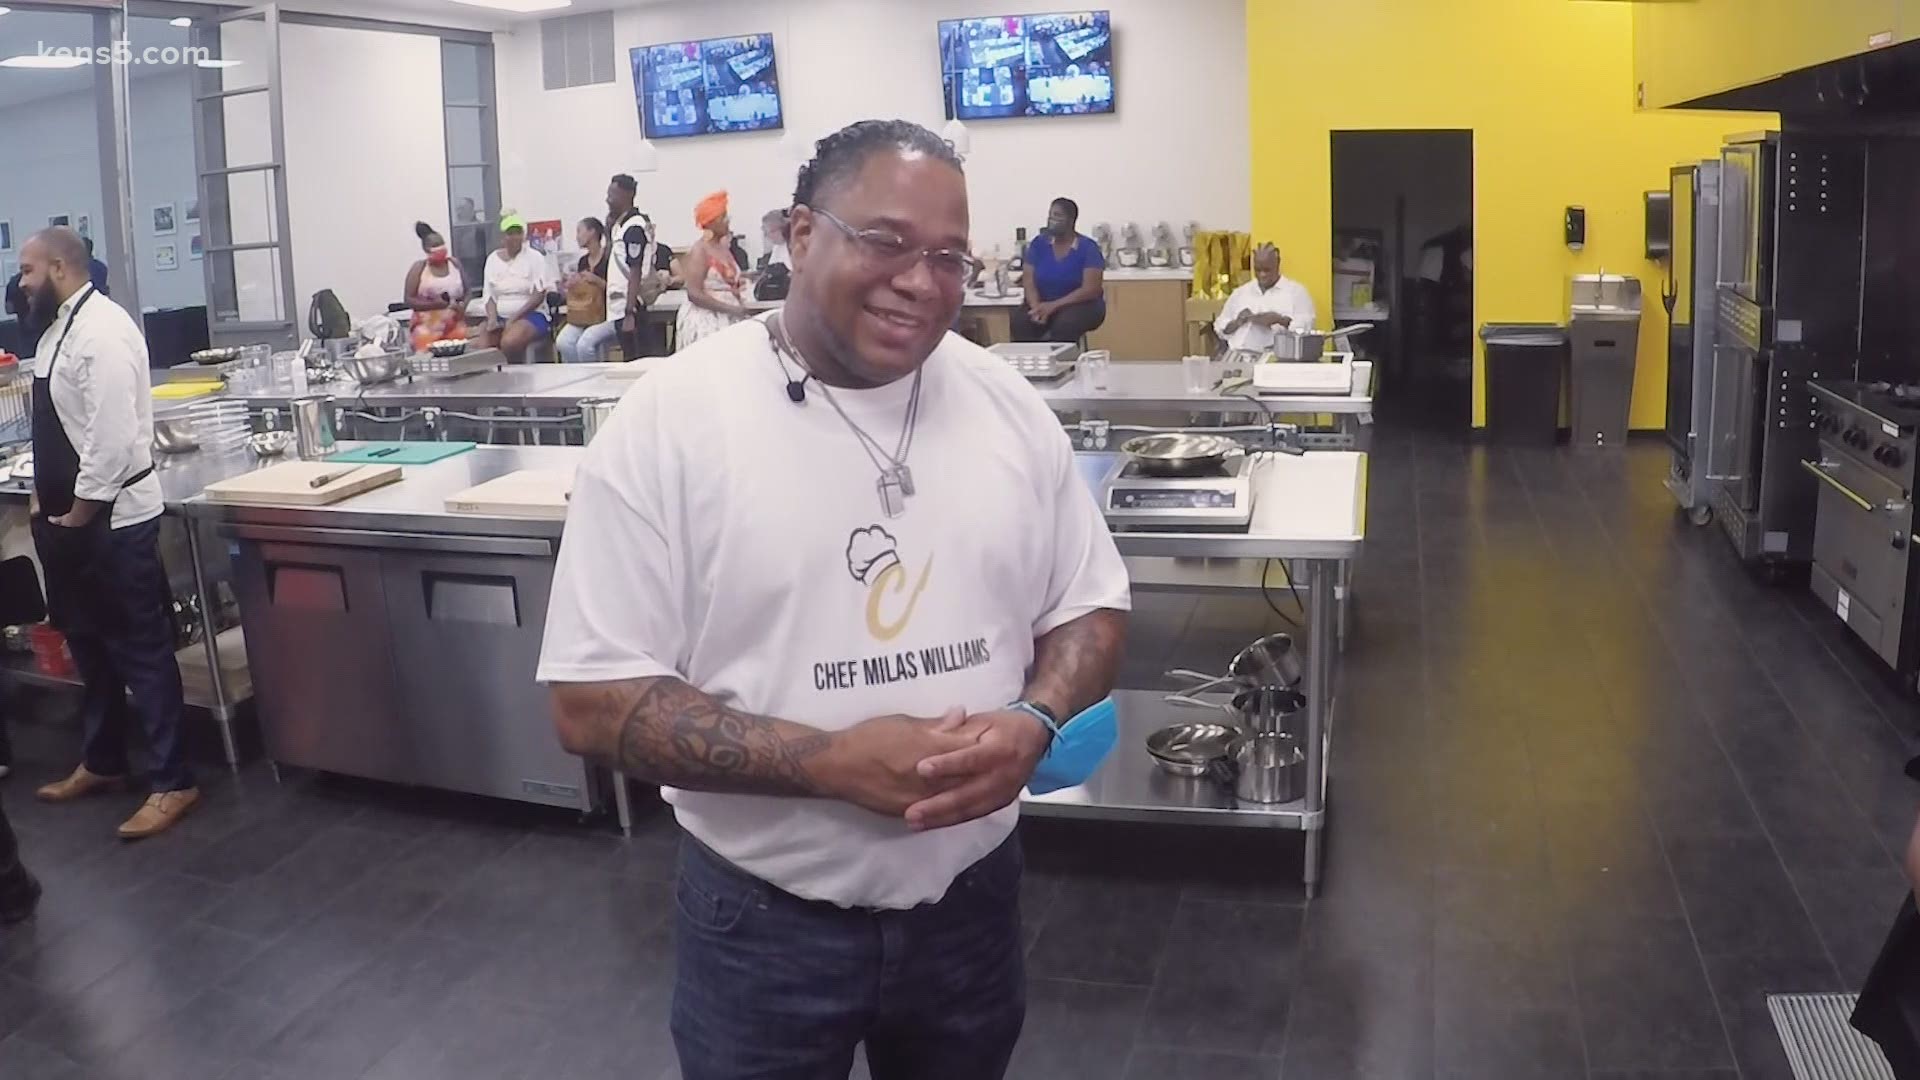 While behind bars for aggravated robbery, Chef Milas Williams fostered a new passion for cooking. Now, he's doing the same for Alamo City kids.